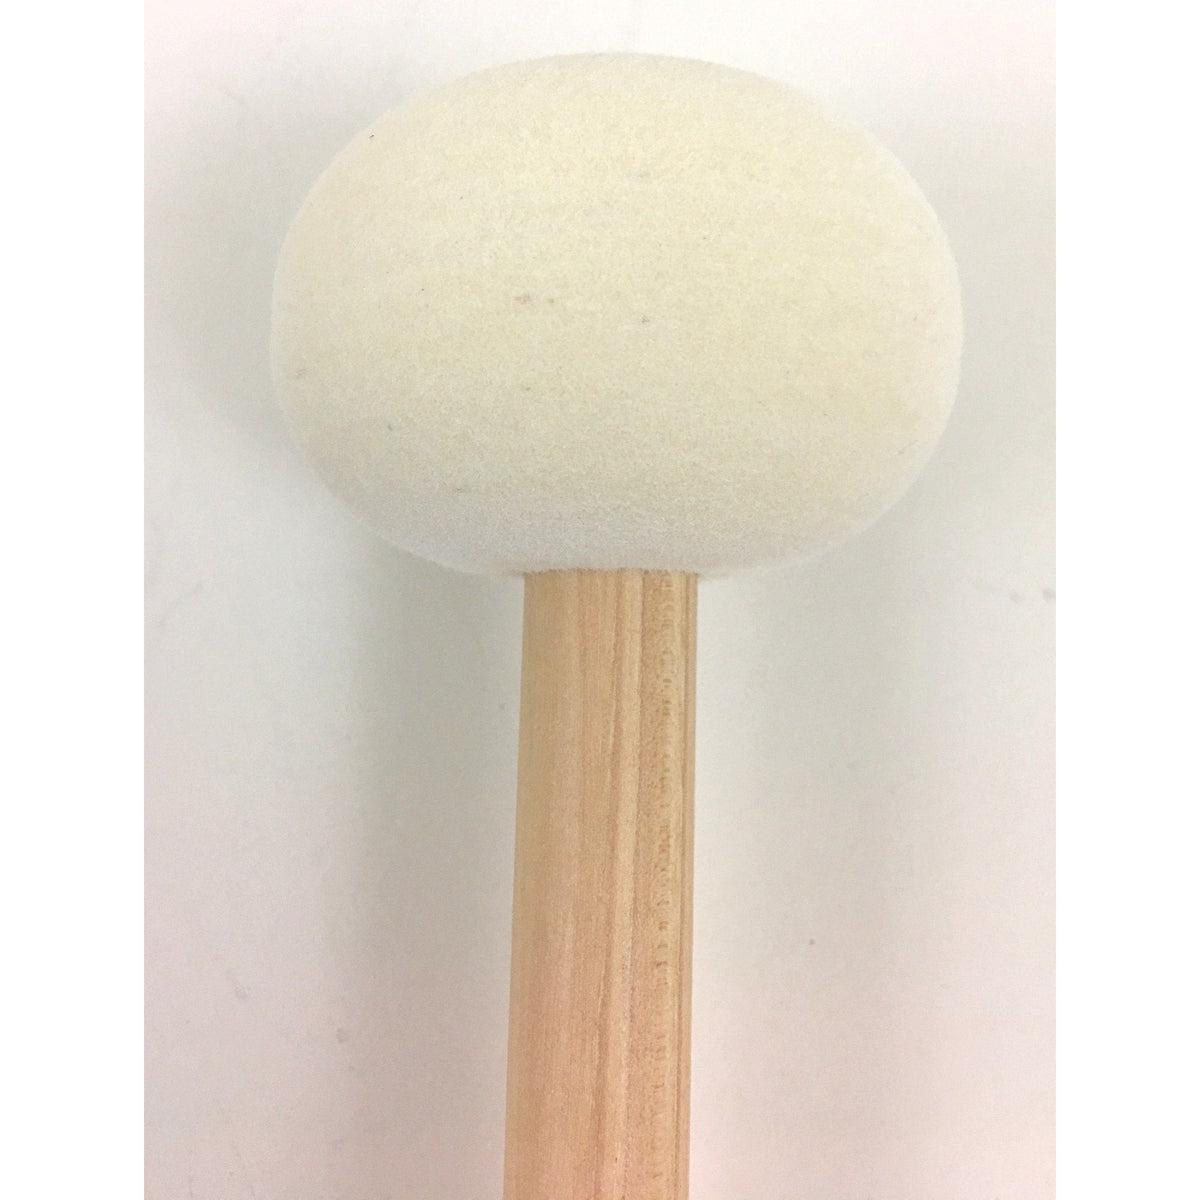 Vic Firth MB5H Bass Drum Mallet